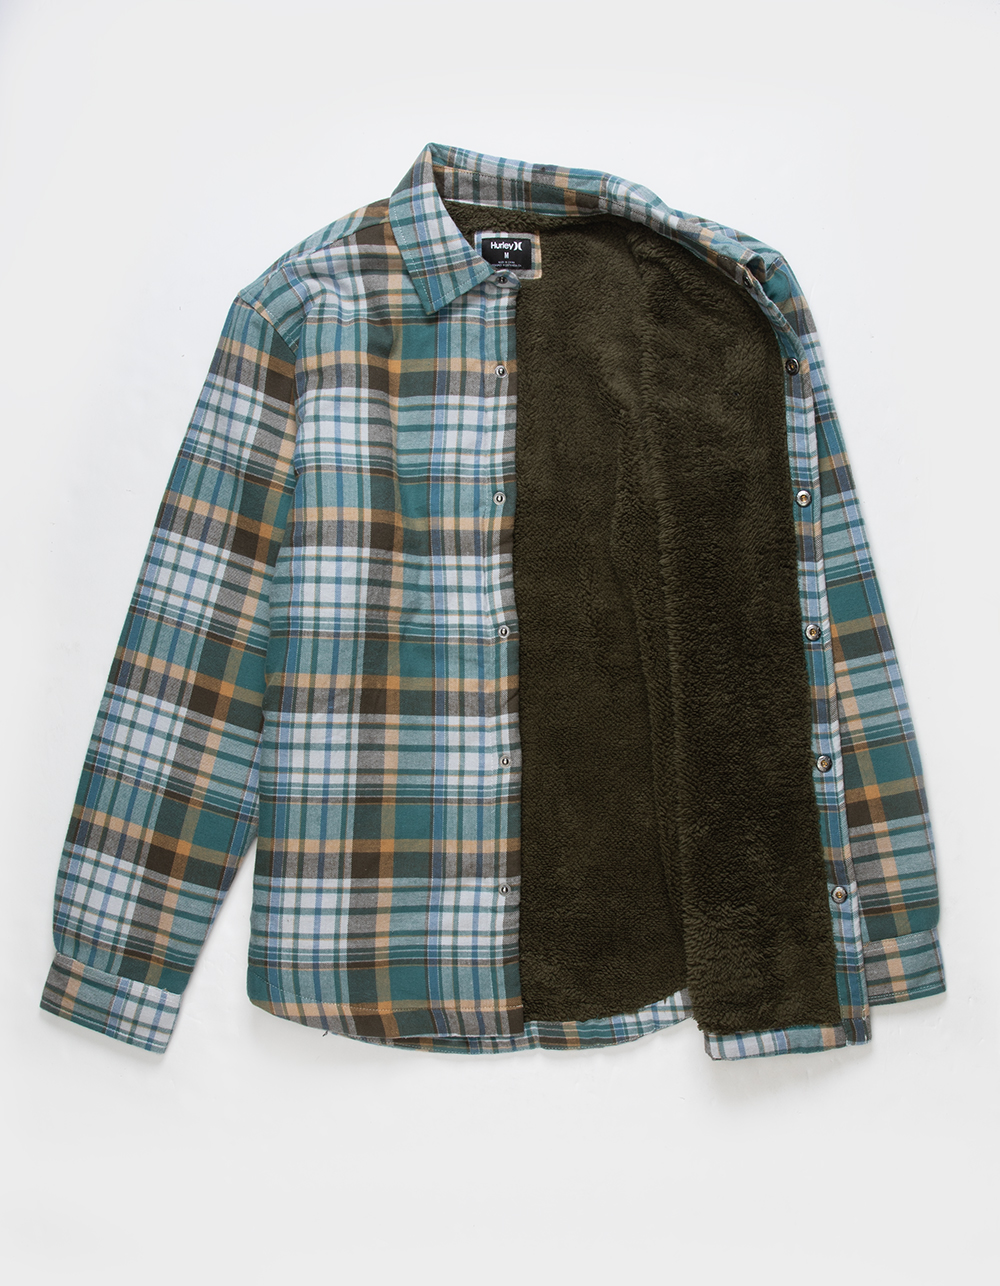 US$ 220.00 - RTS USA warehouse 15 panels Polyester Flannel